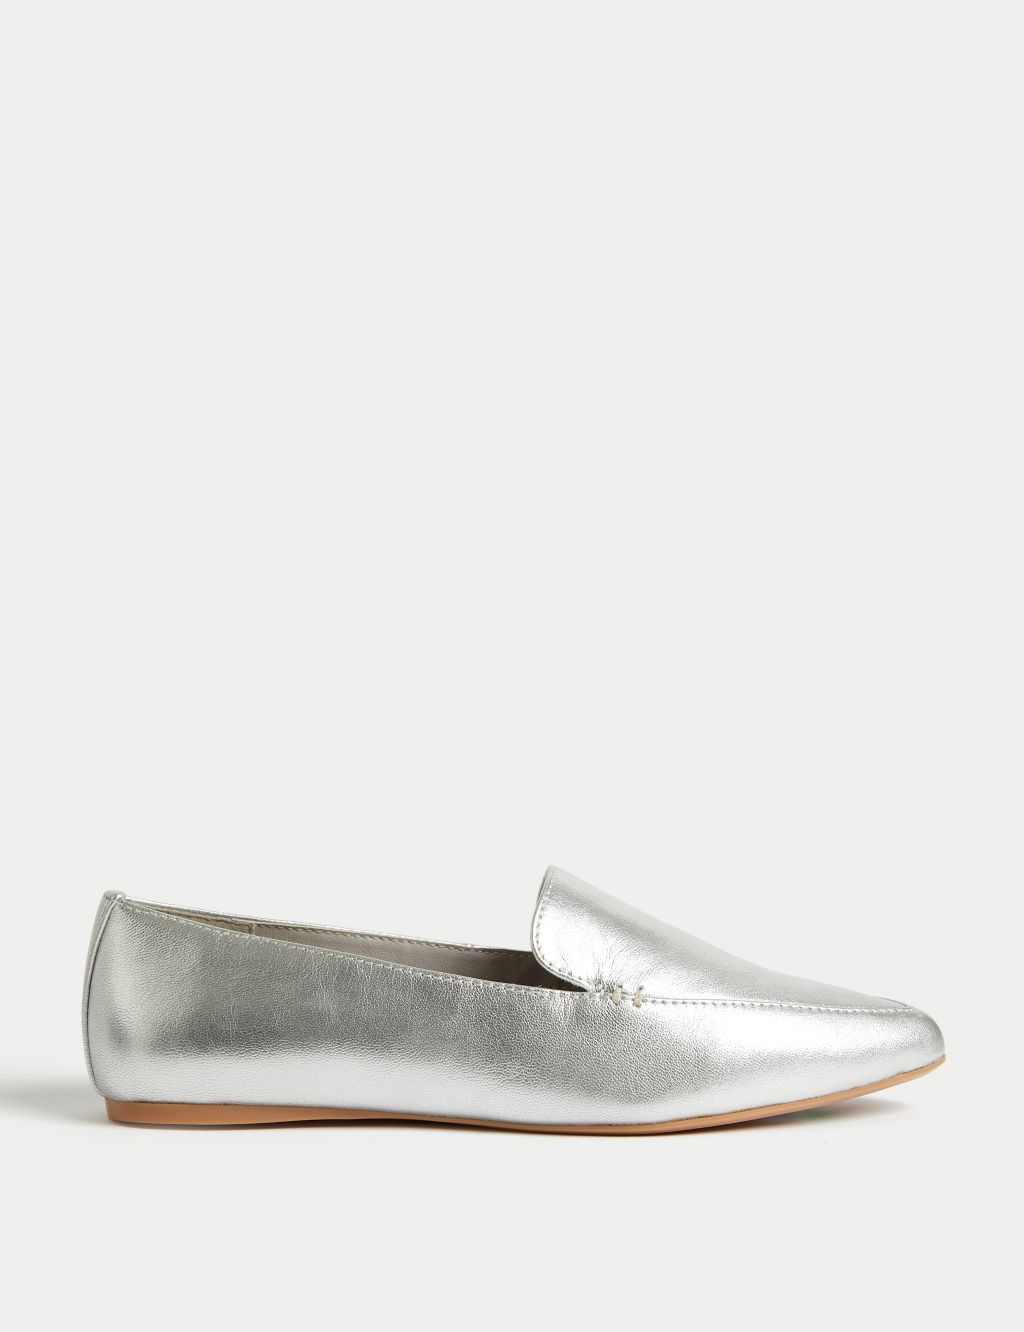 Wide Fit Leather Pointed Ballet Pumps | M&S Collection | M&S